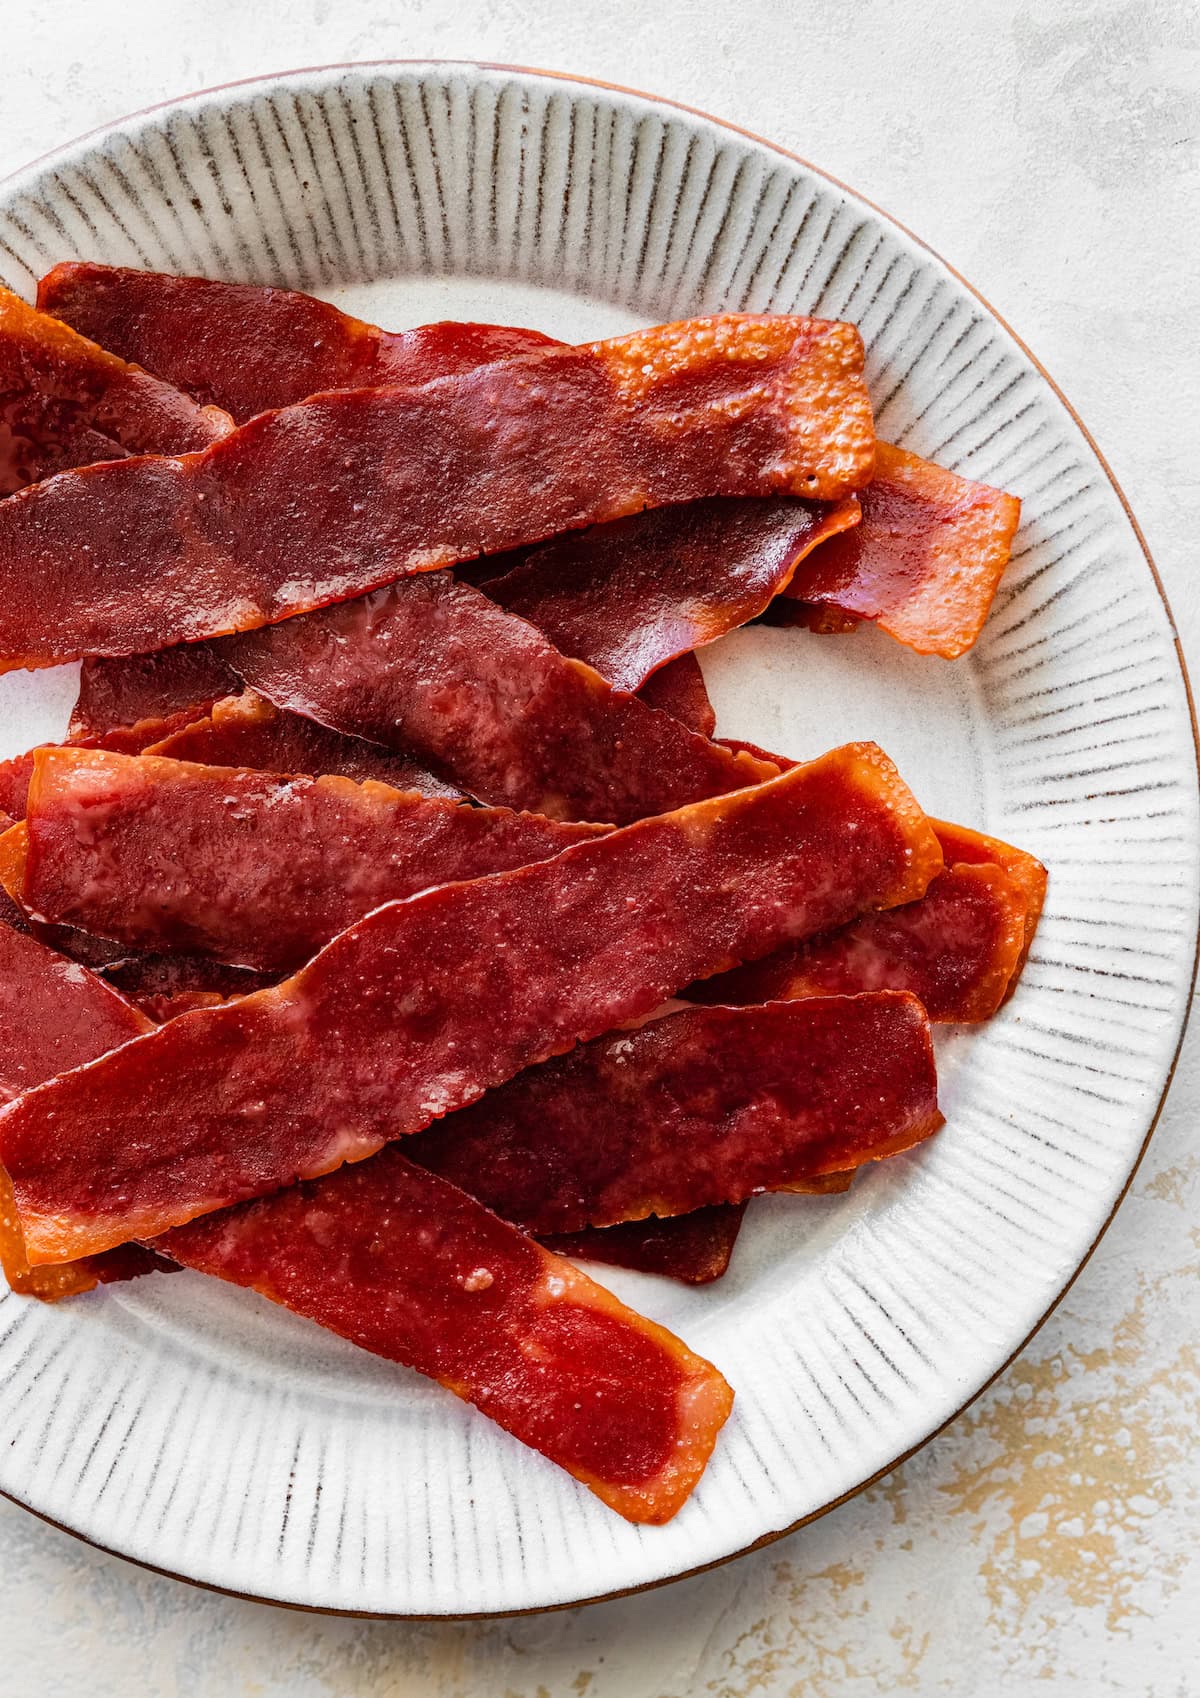 Turkey bacon on a white plate.